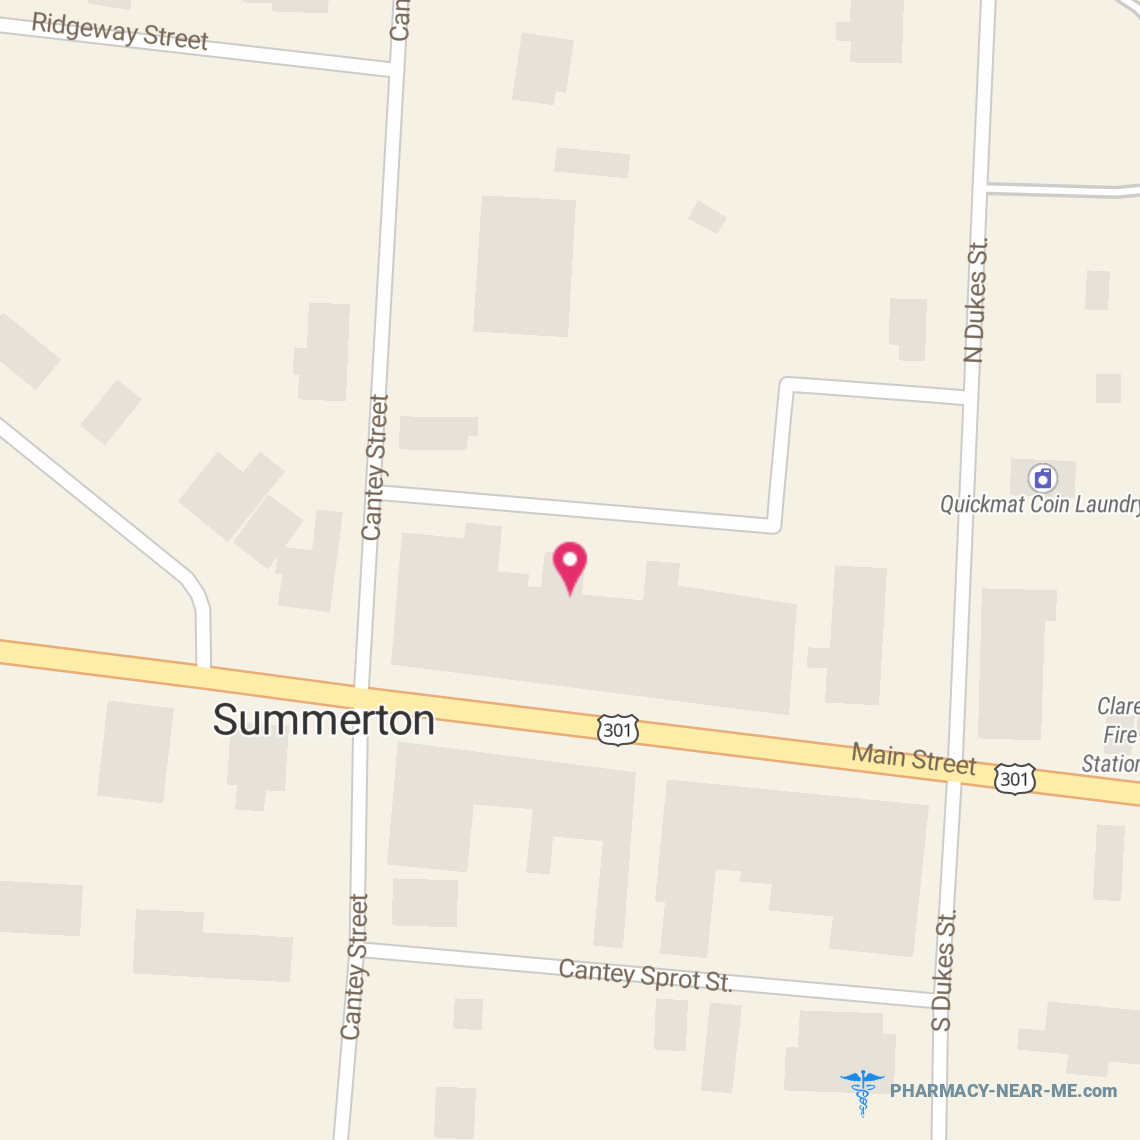 SUMMERTON DRUGS COMPOUNDING AND DISPENSARY - Pharmacy Hours, Phone, Reviews & Information: 115b Main Street, Summerton, South Carolina 29148, United States